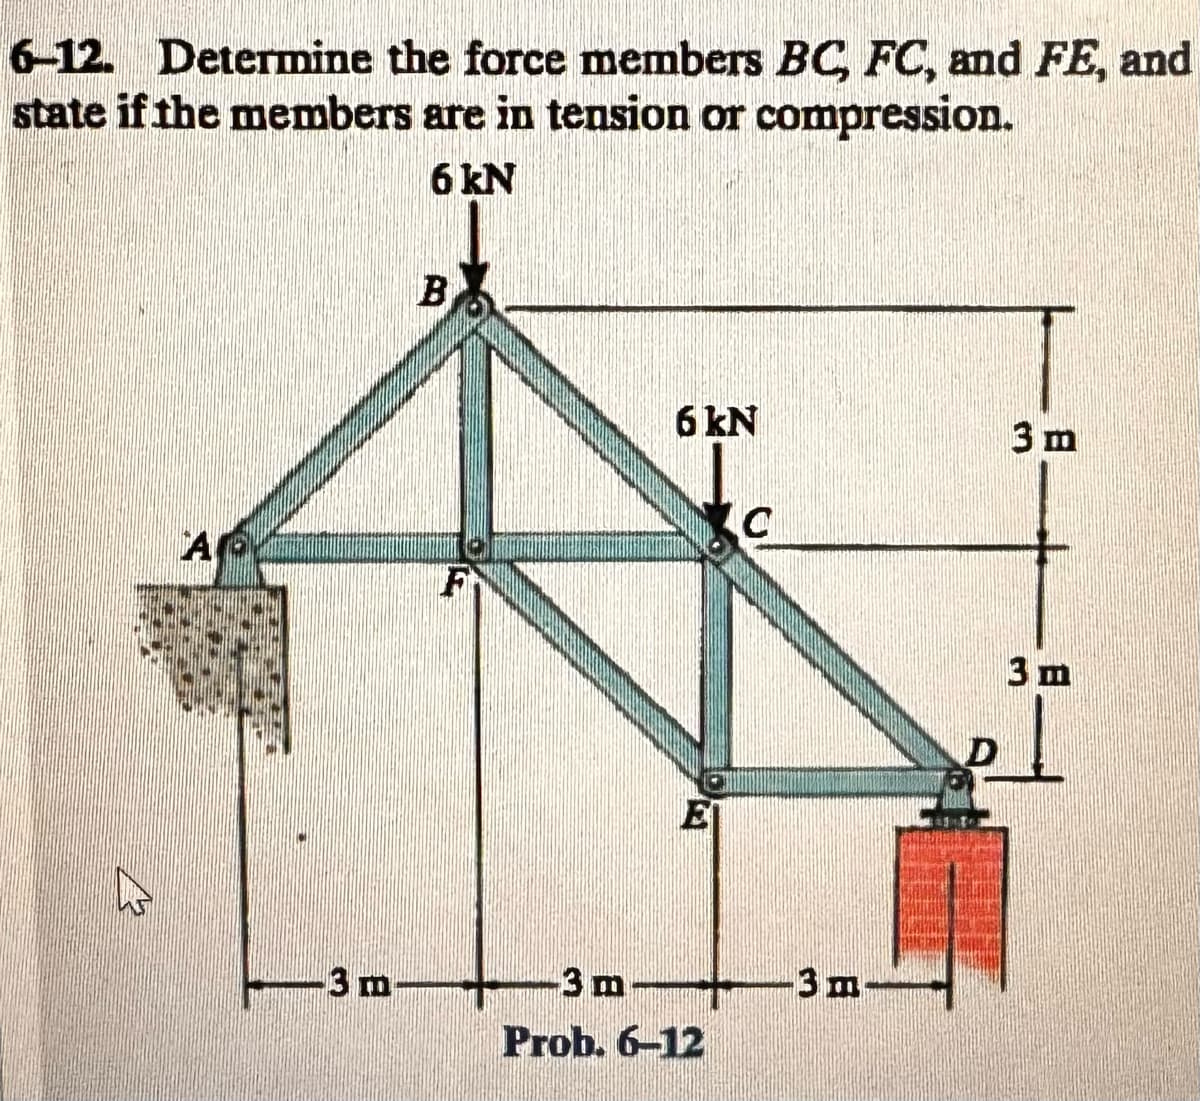 6-12. Determine the force members BC, FC, and FE, and
state if the members are in tension or compression.
6 kN
AG
3 m
B
F
6 kN
El
3 m
Prob. 6-12
C
3 m
3 m
3 m